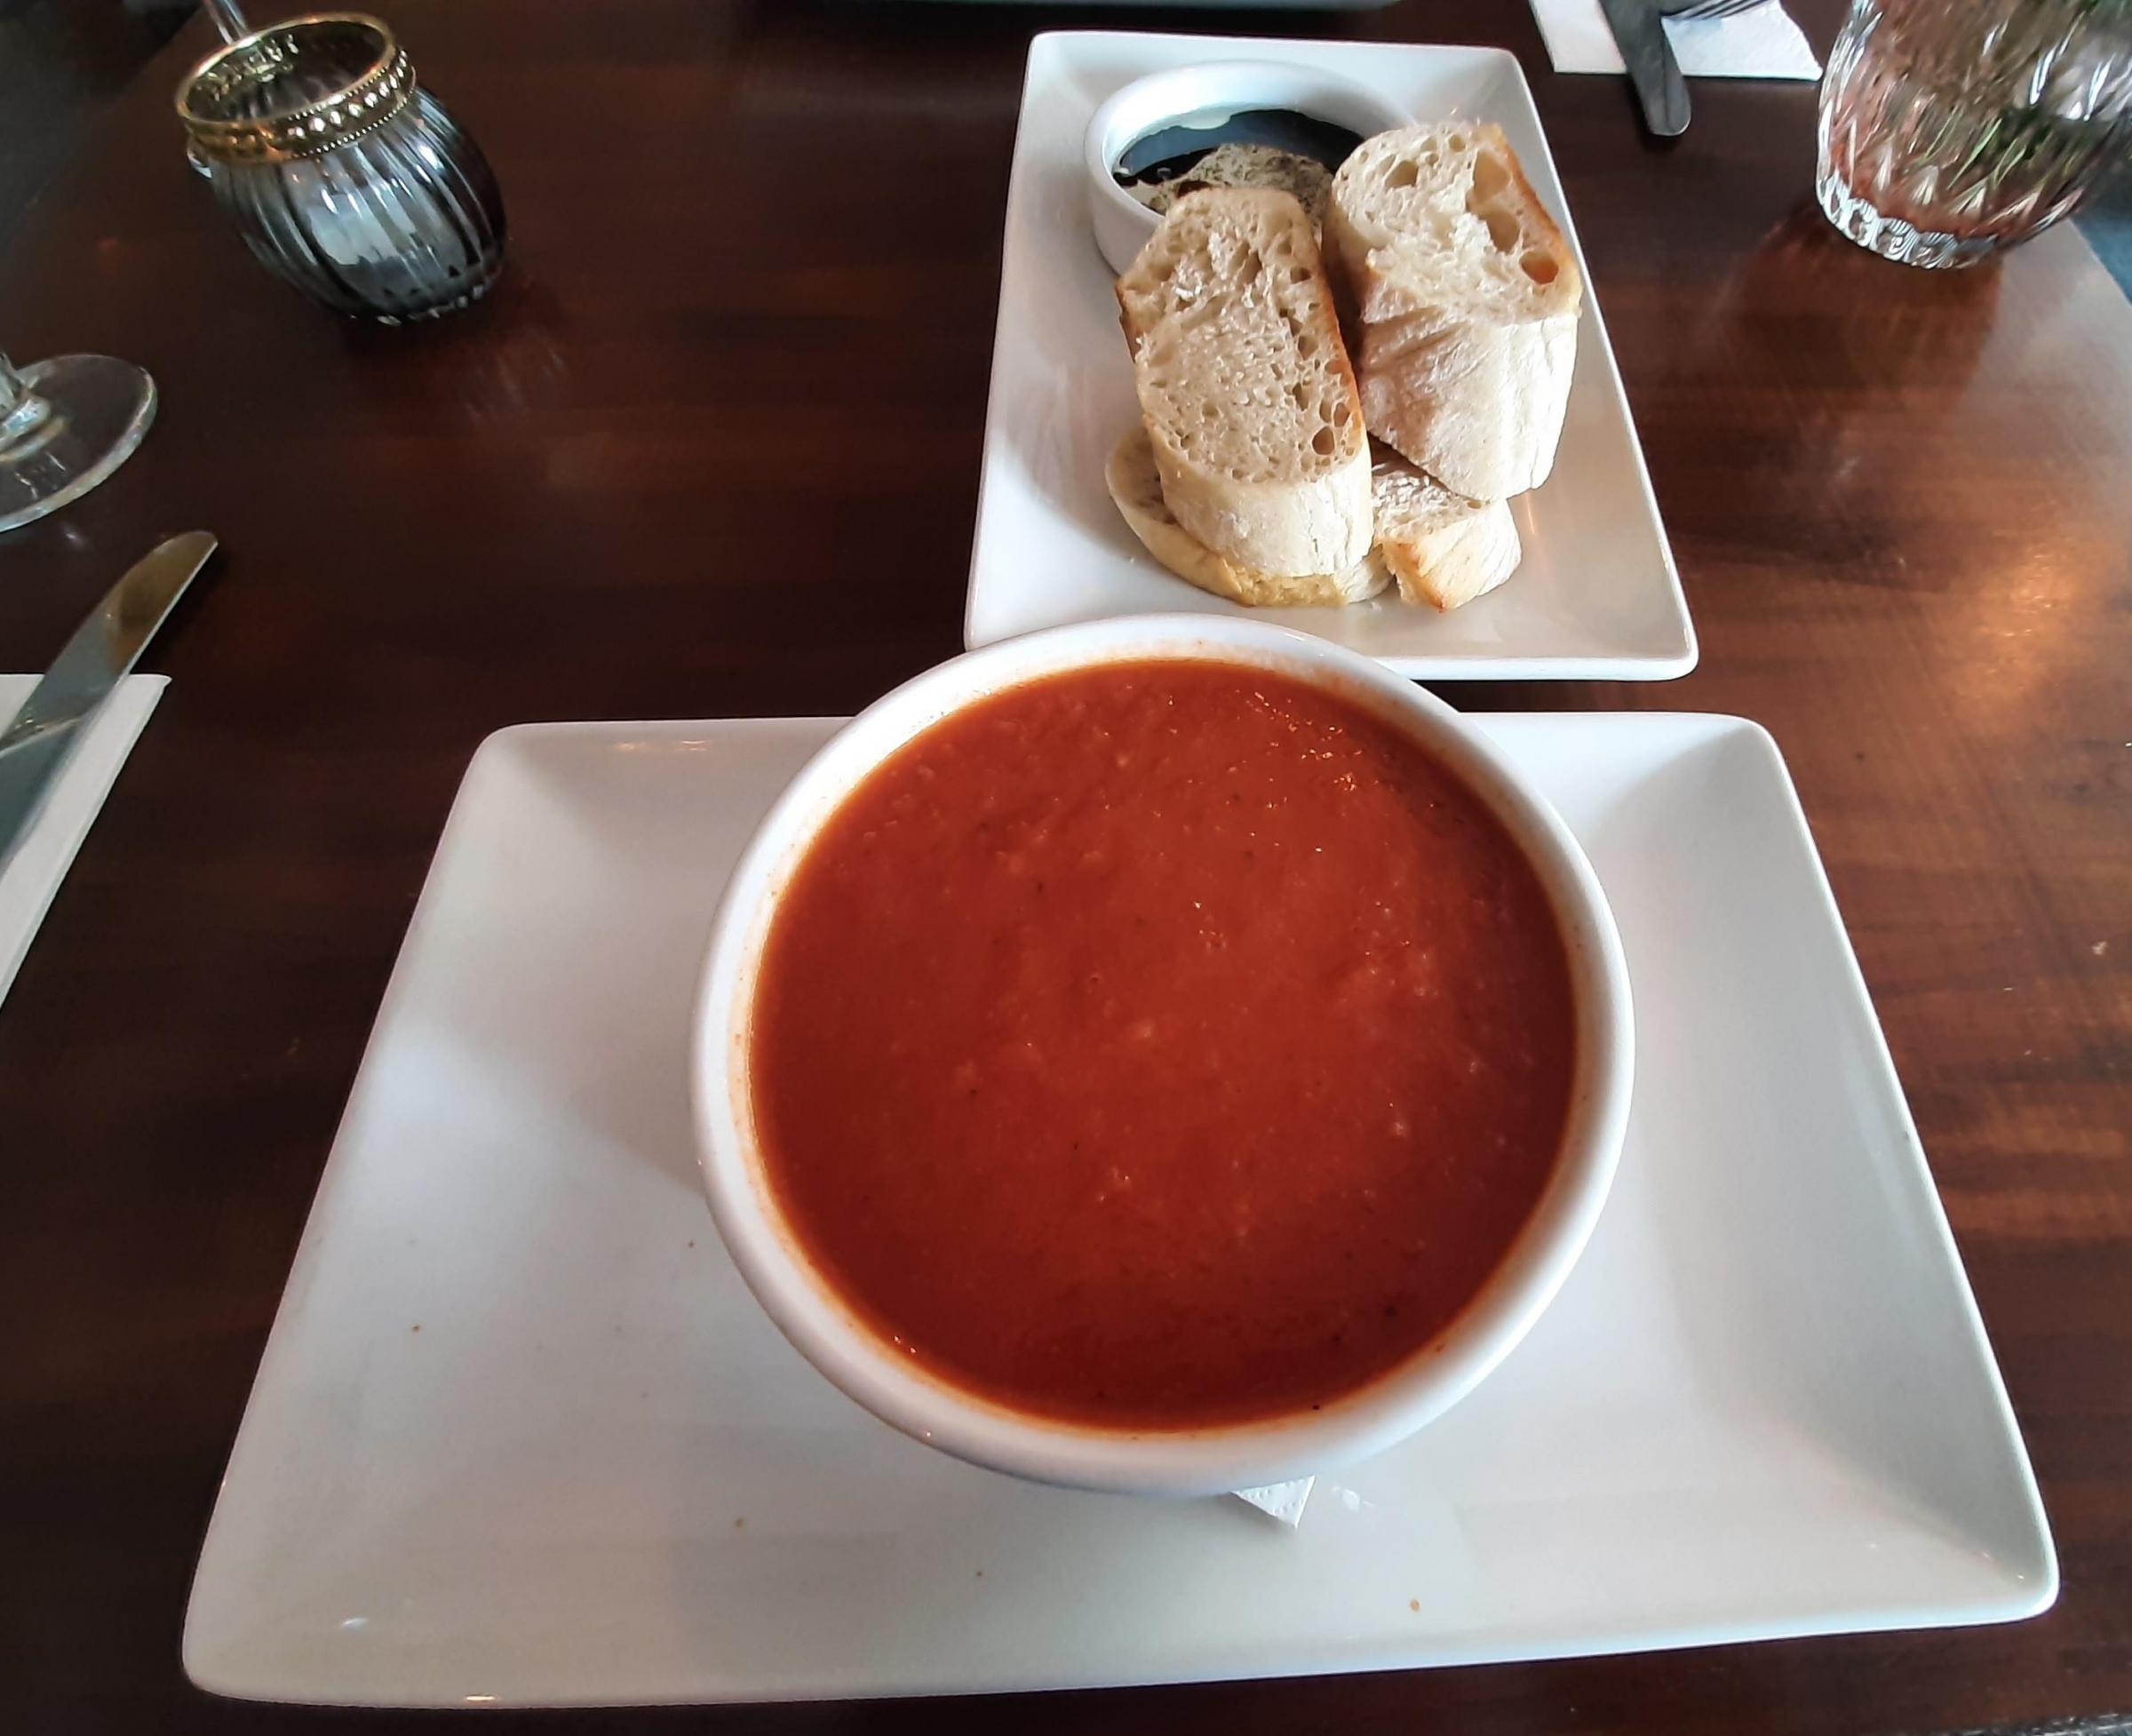 Spicy tomato soup as a starter was a meal in itself